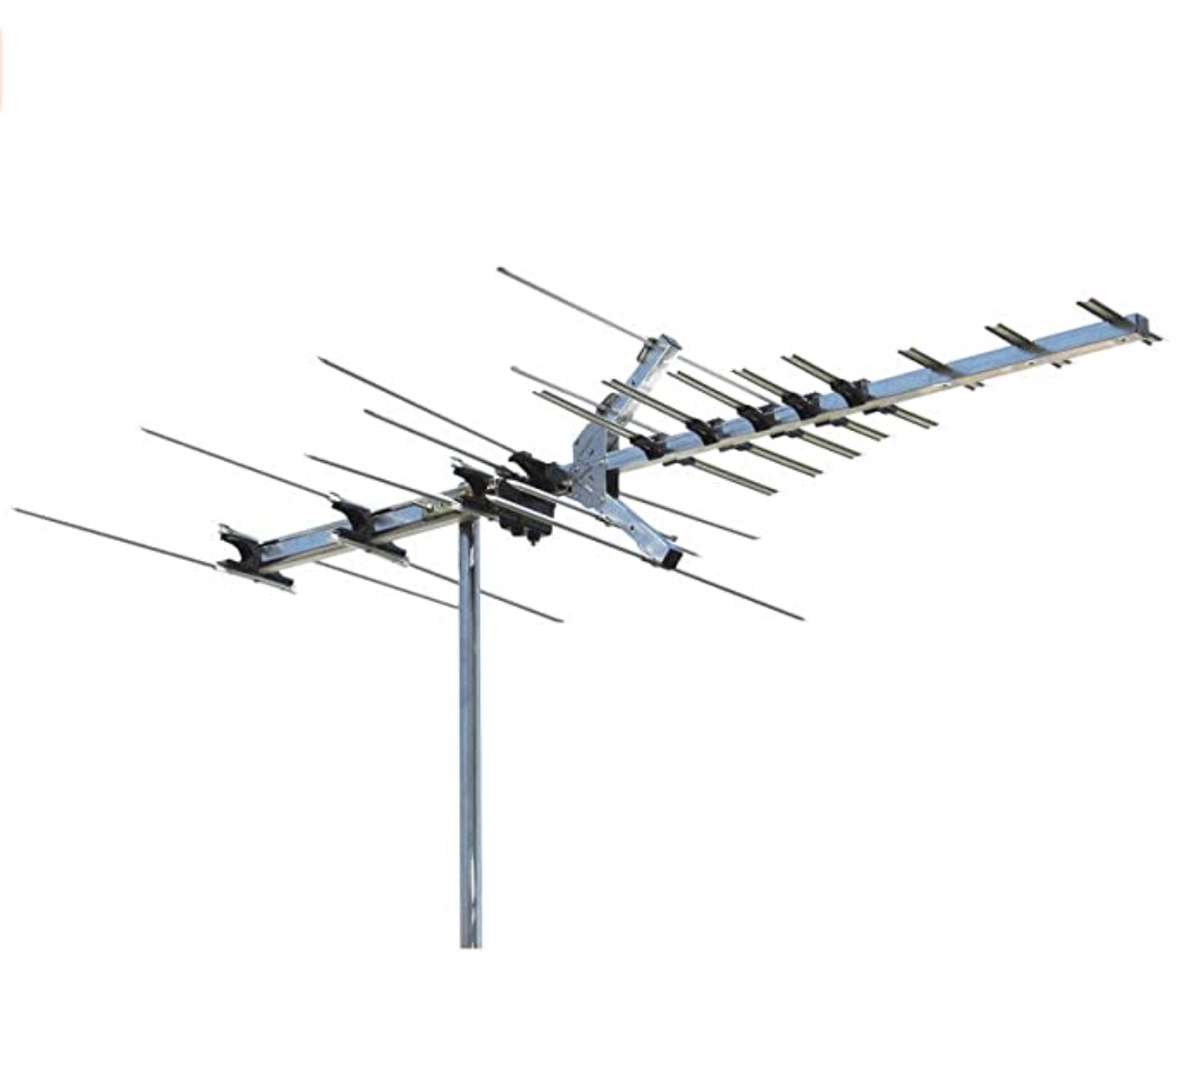 What are the different types of outdoor TV antenna